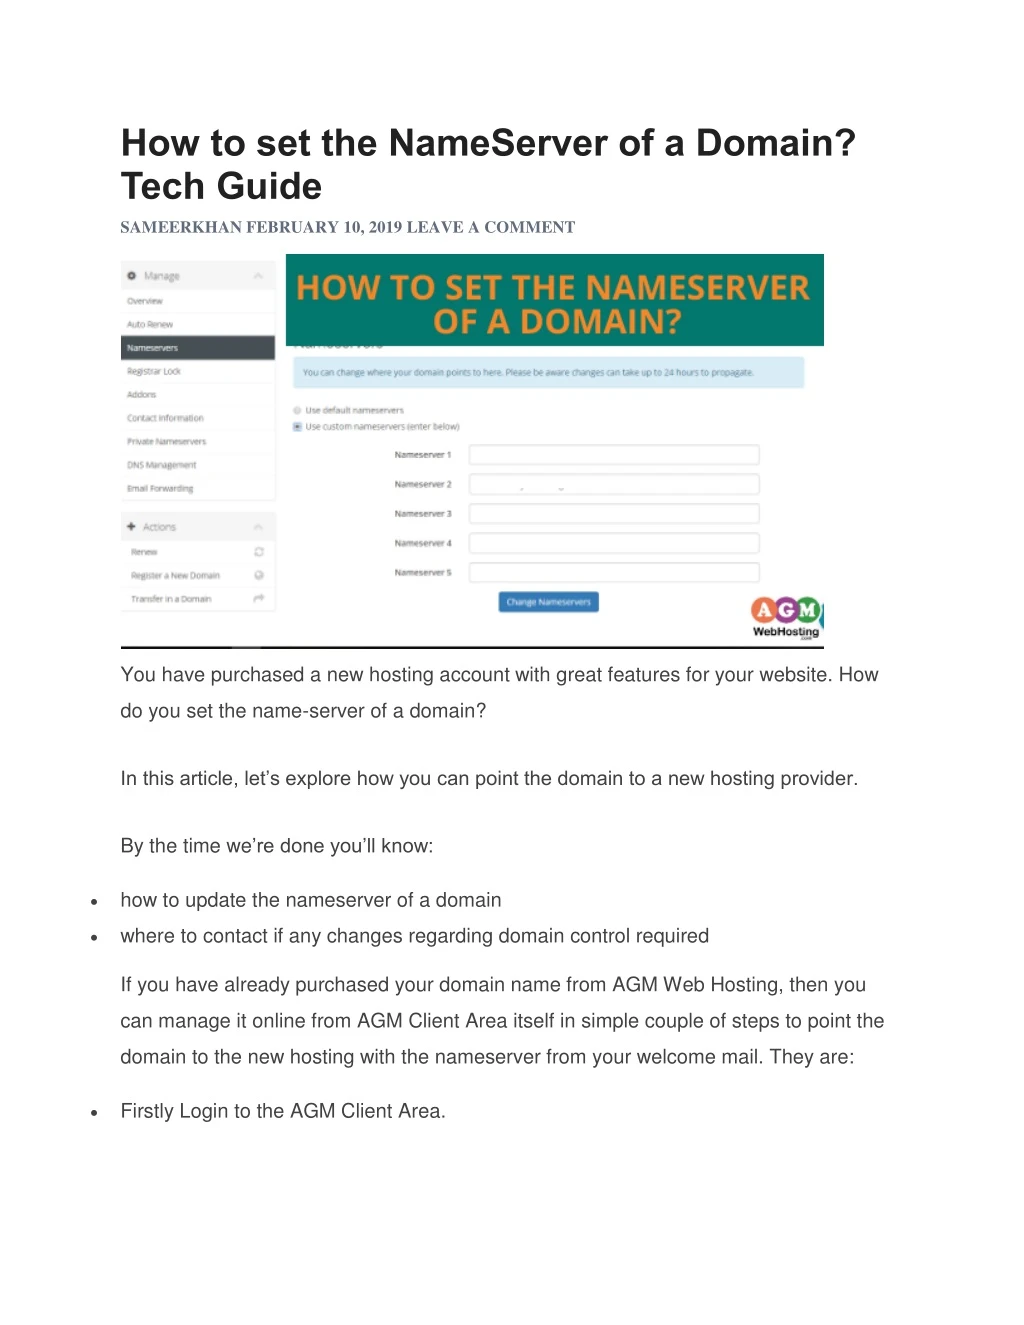 how to set the nameserver of a domain tech guide